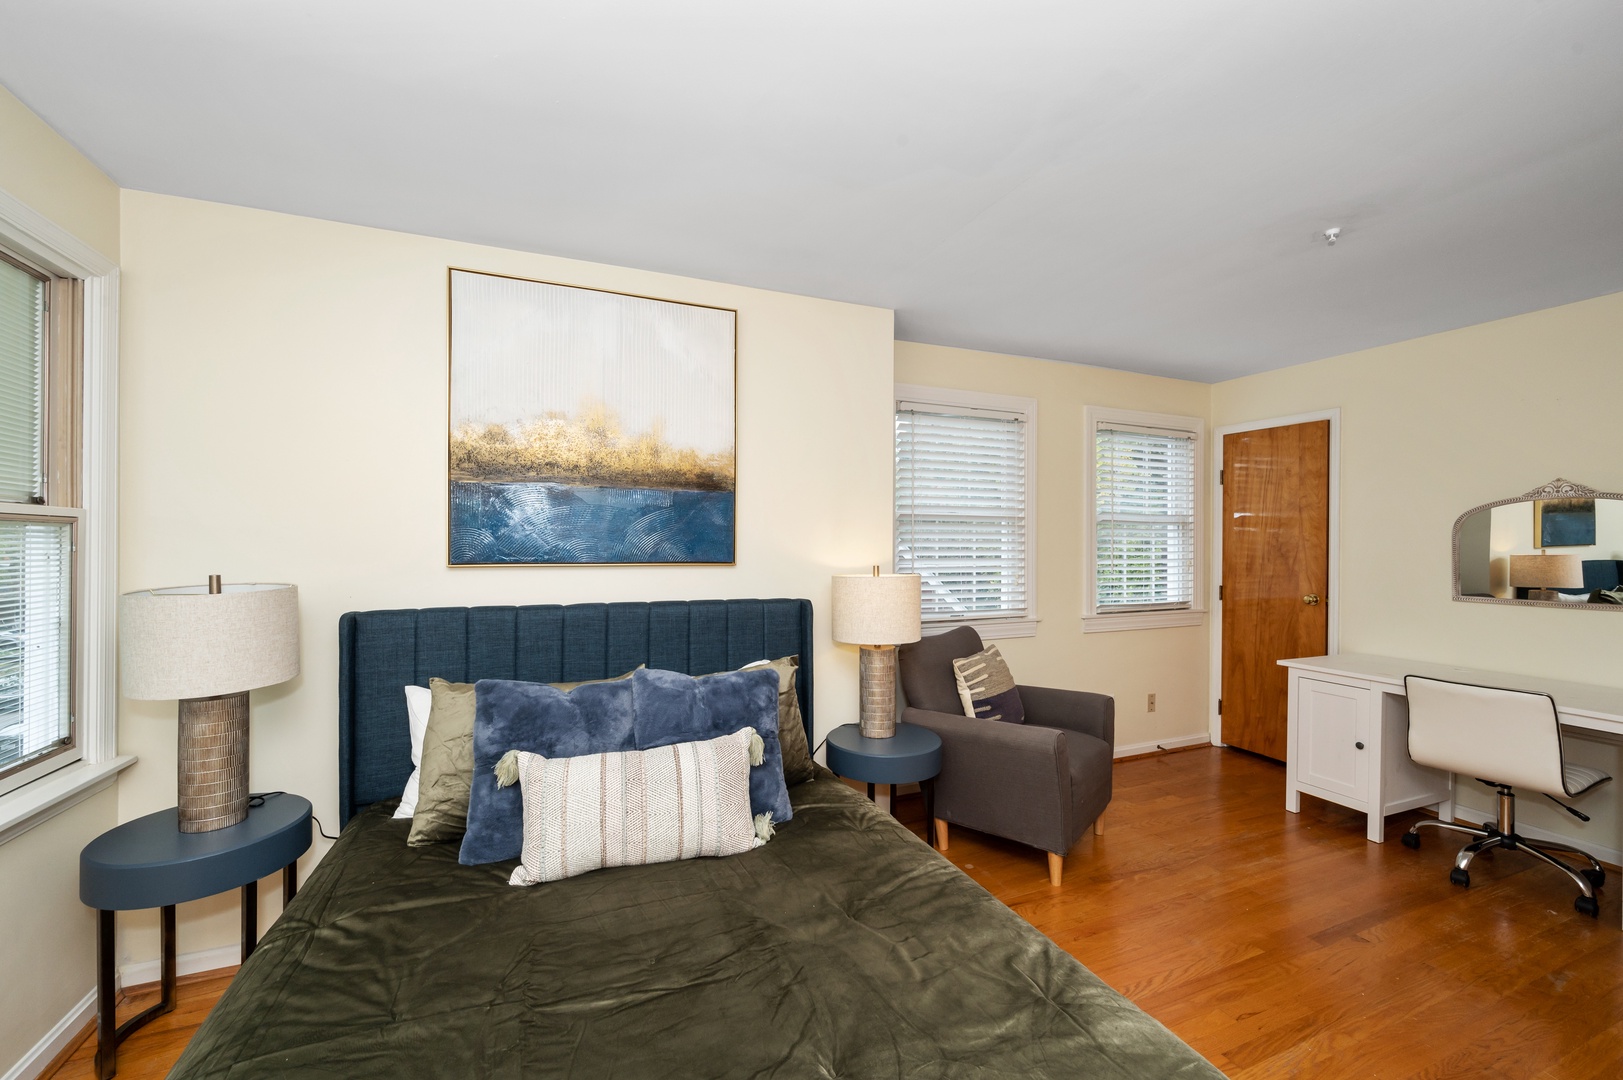 This 2nd floor bedroom offers a queen bed, desk workspace, & chic sitting area